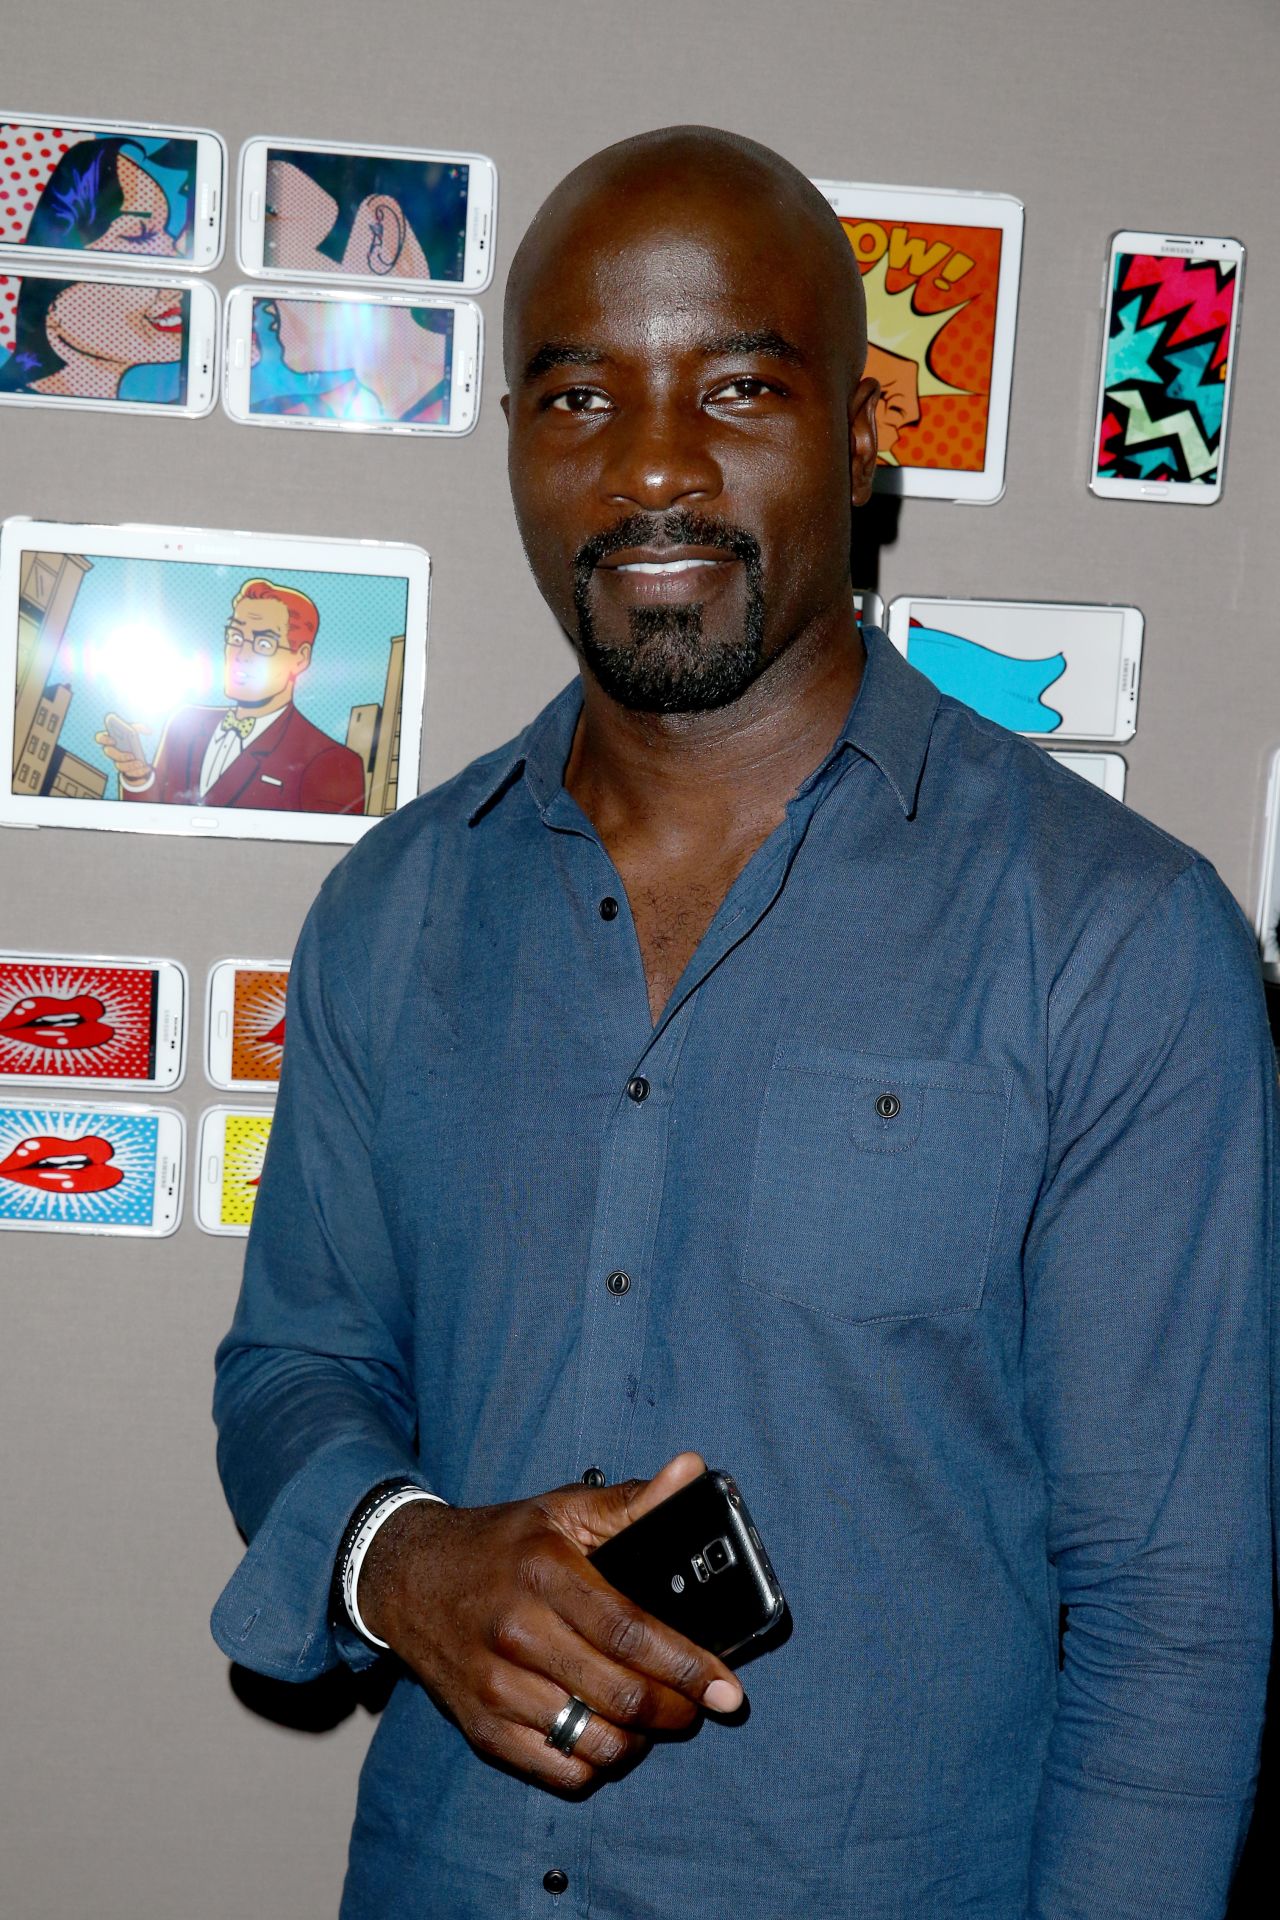 Mike Colter is superhero Luke Cage/Power Man in the Netflix series "Jessica Jones" and "Luke Cage."